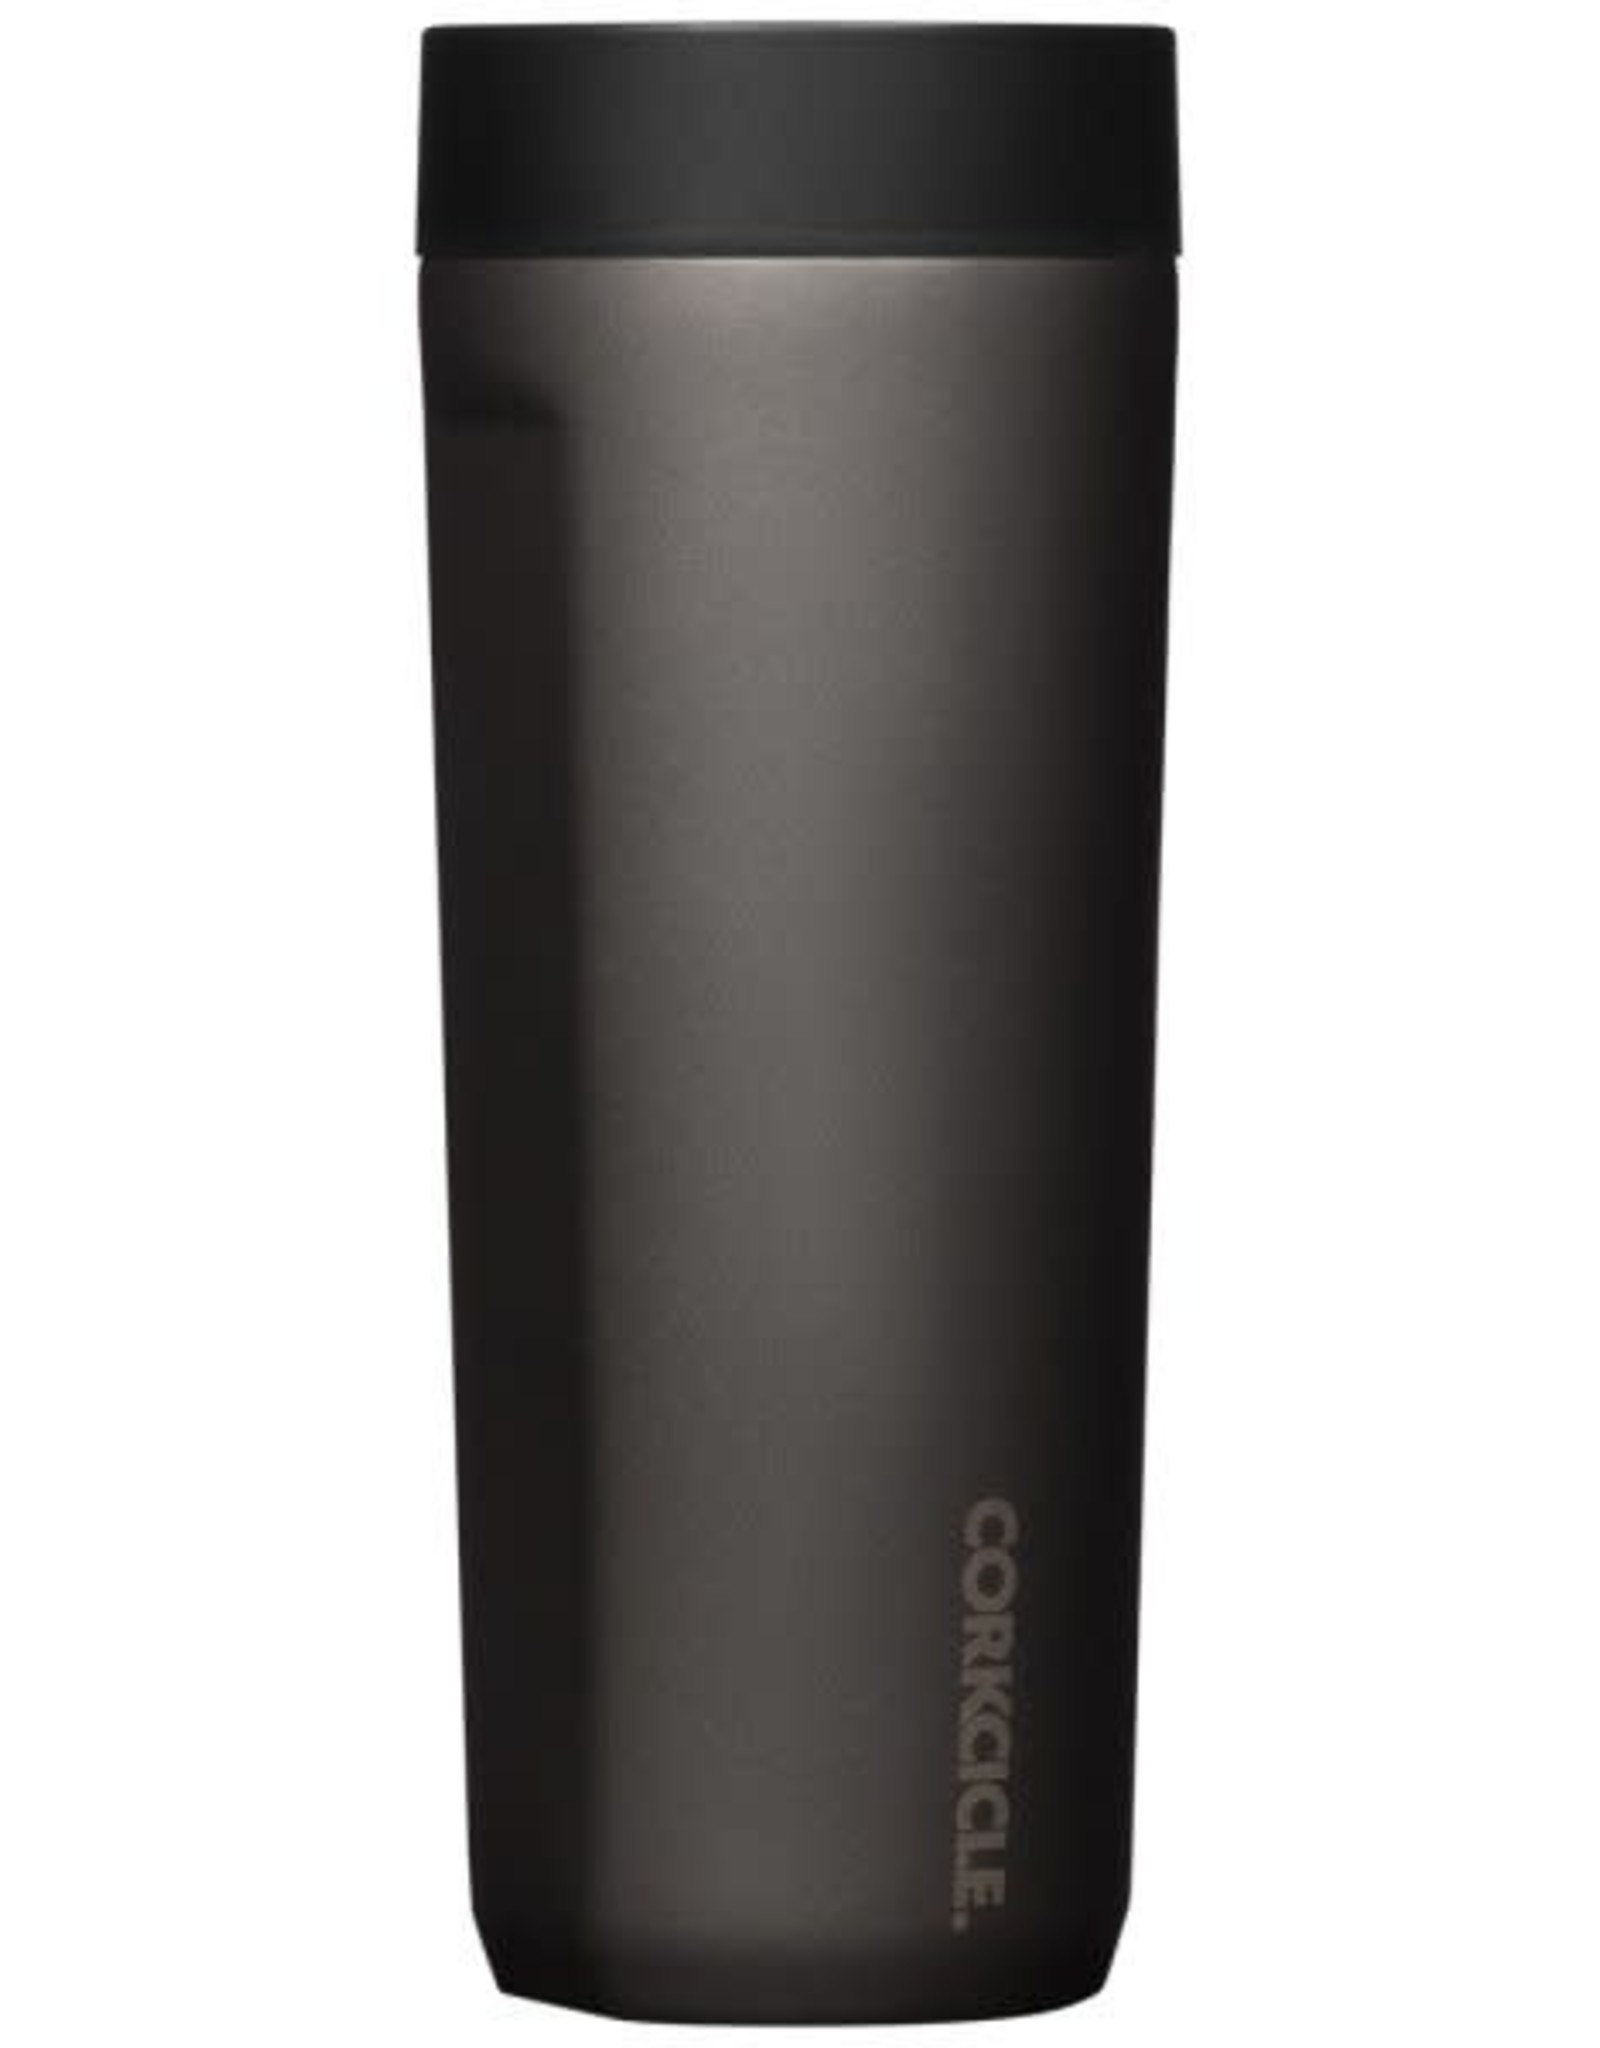 Corkcicle Spill-Proof 360 Sip Lid